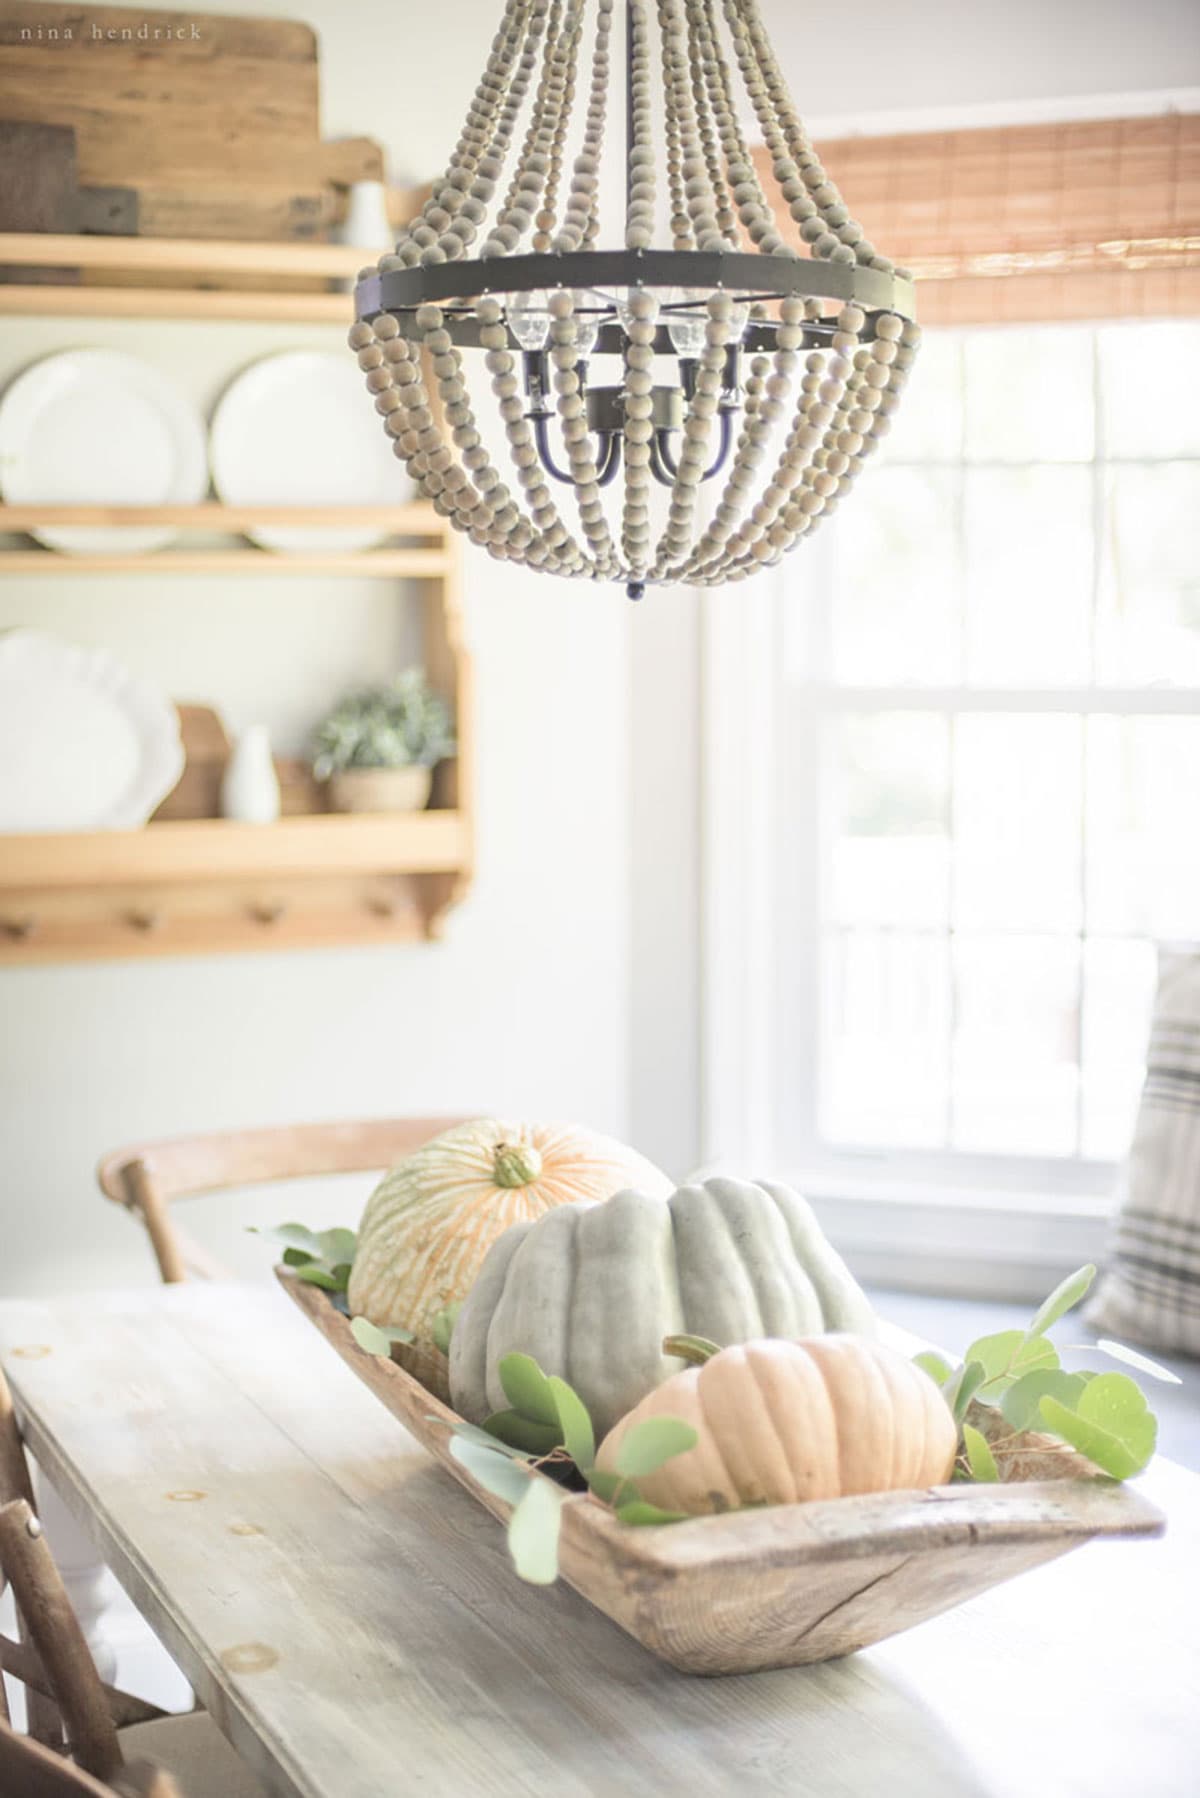 Fall decor ideas featuring a wooden table adorned with pumpkins and a chandelier.